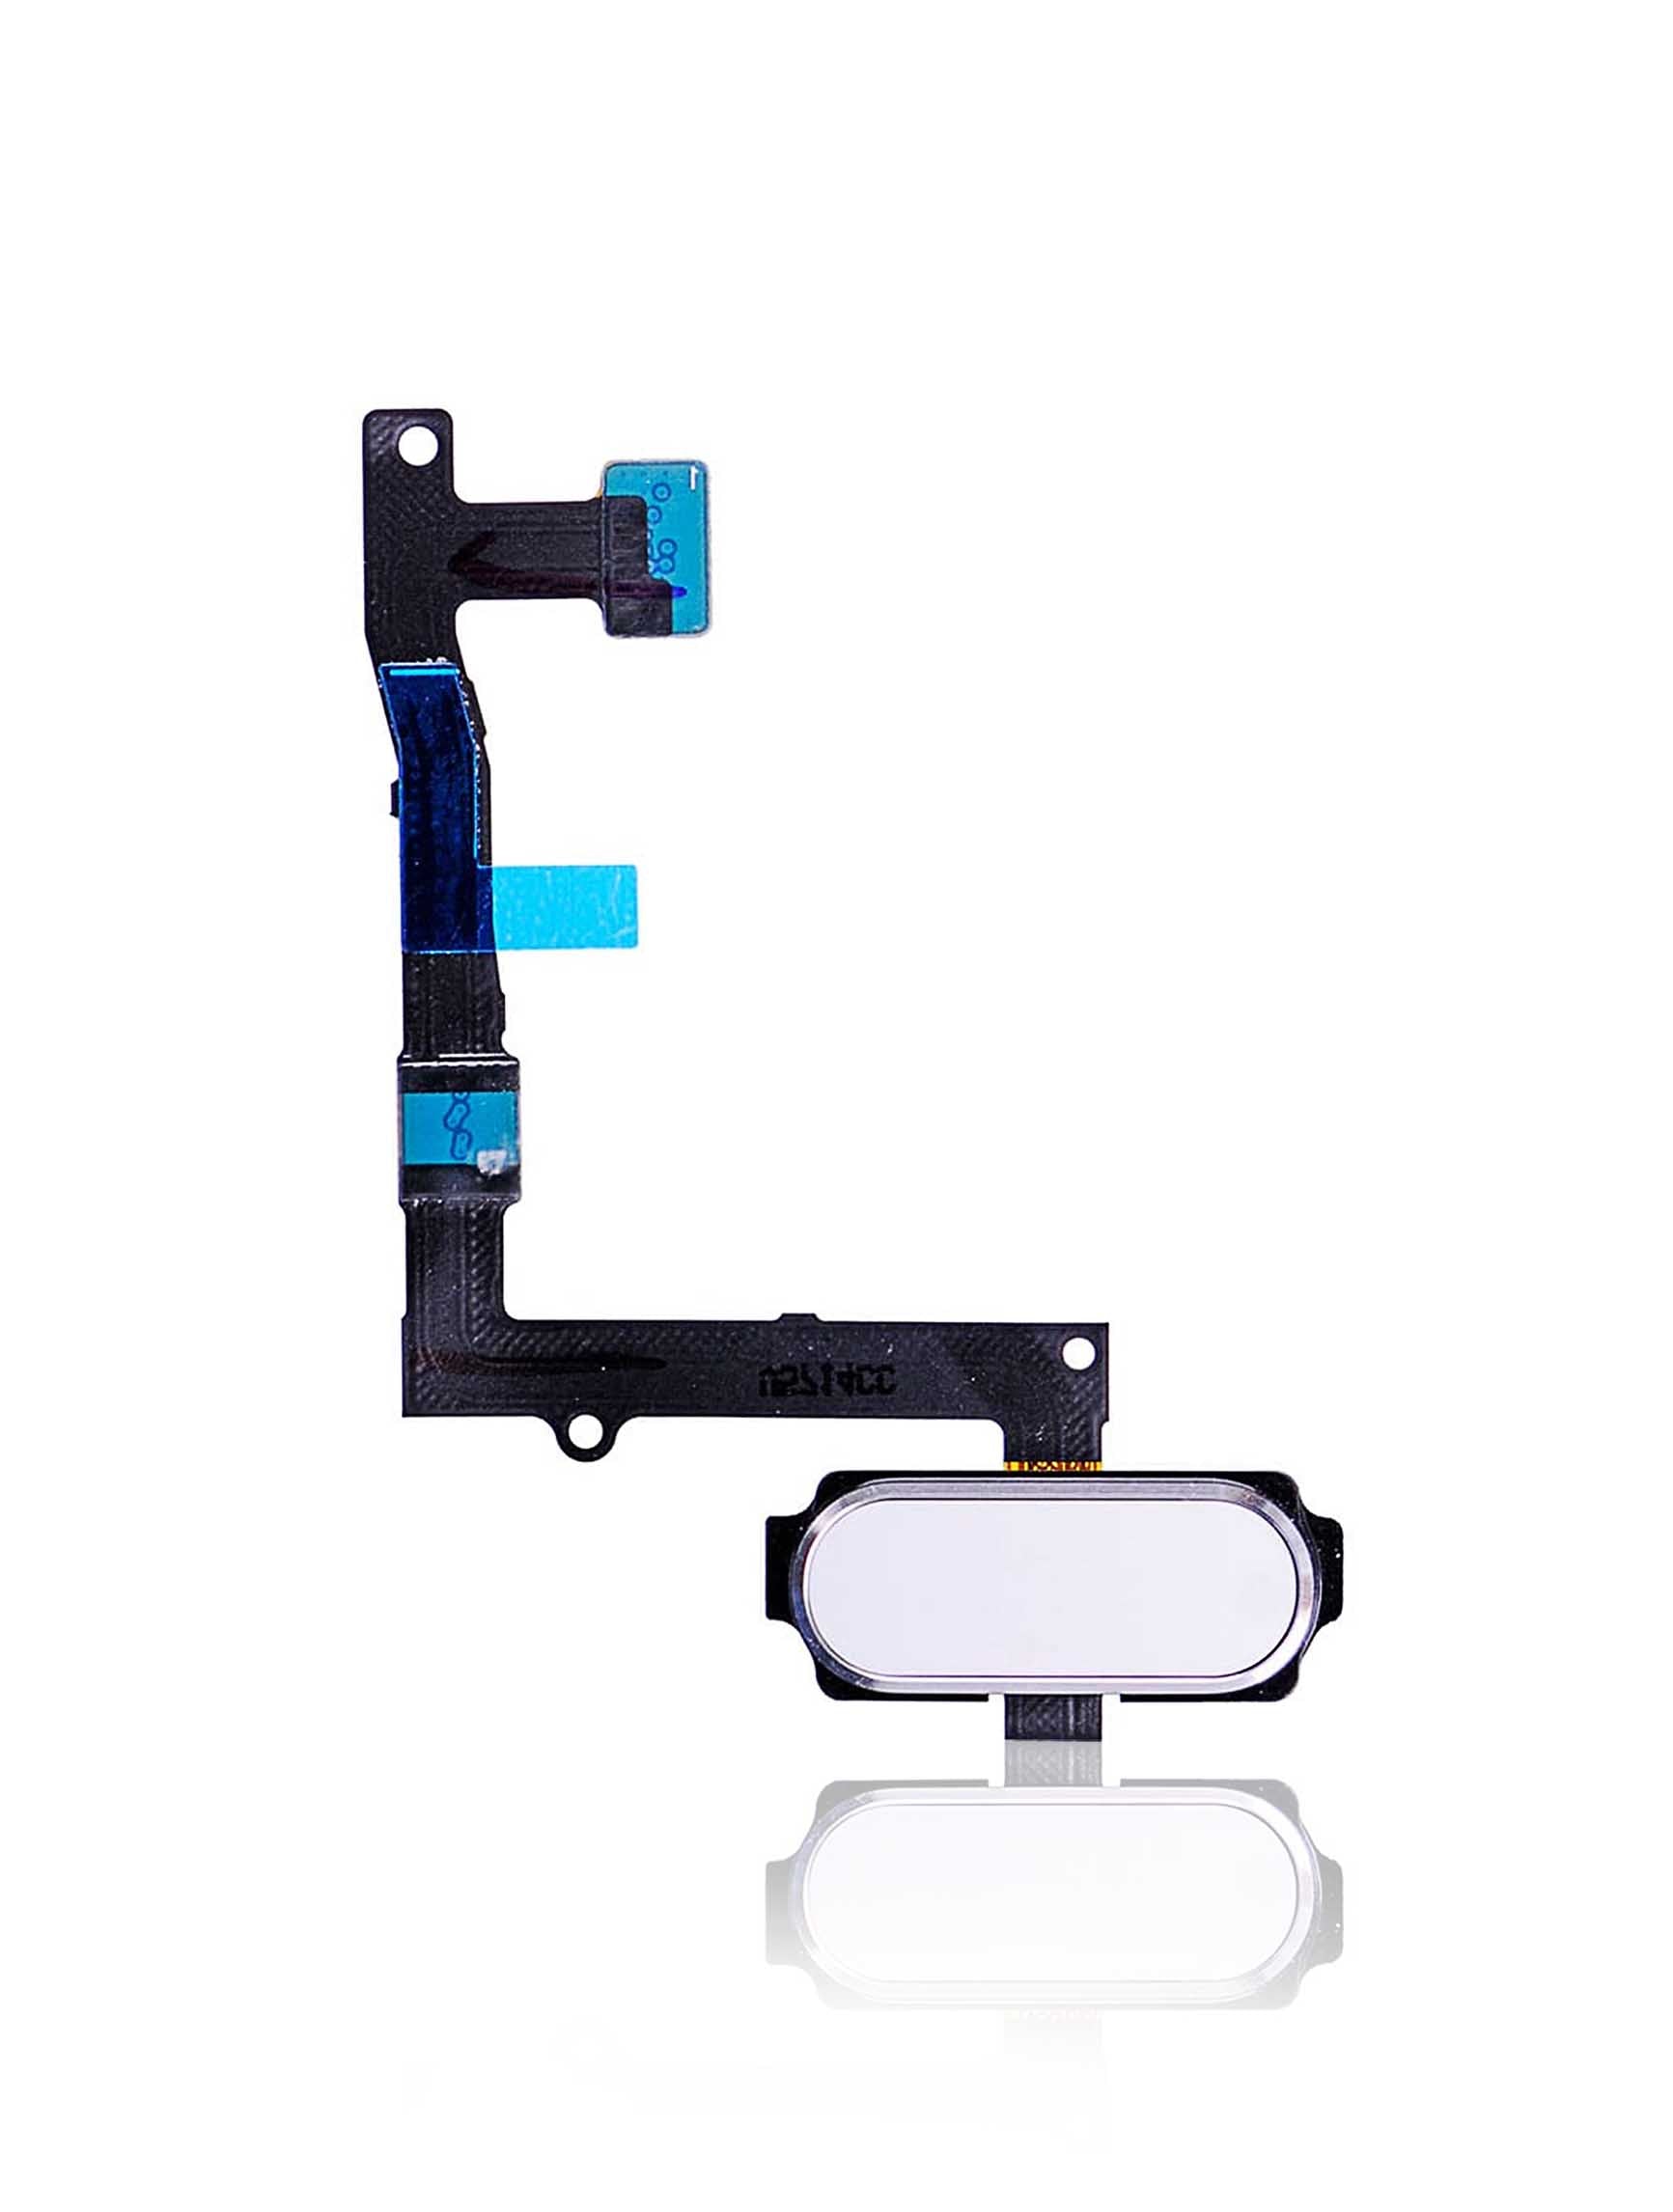 For Samsung Galaxy S6 Edge Plus Fingerprint Sensor With flex cable Replacement (All Colors)